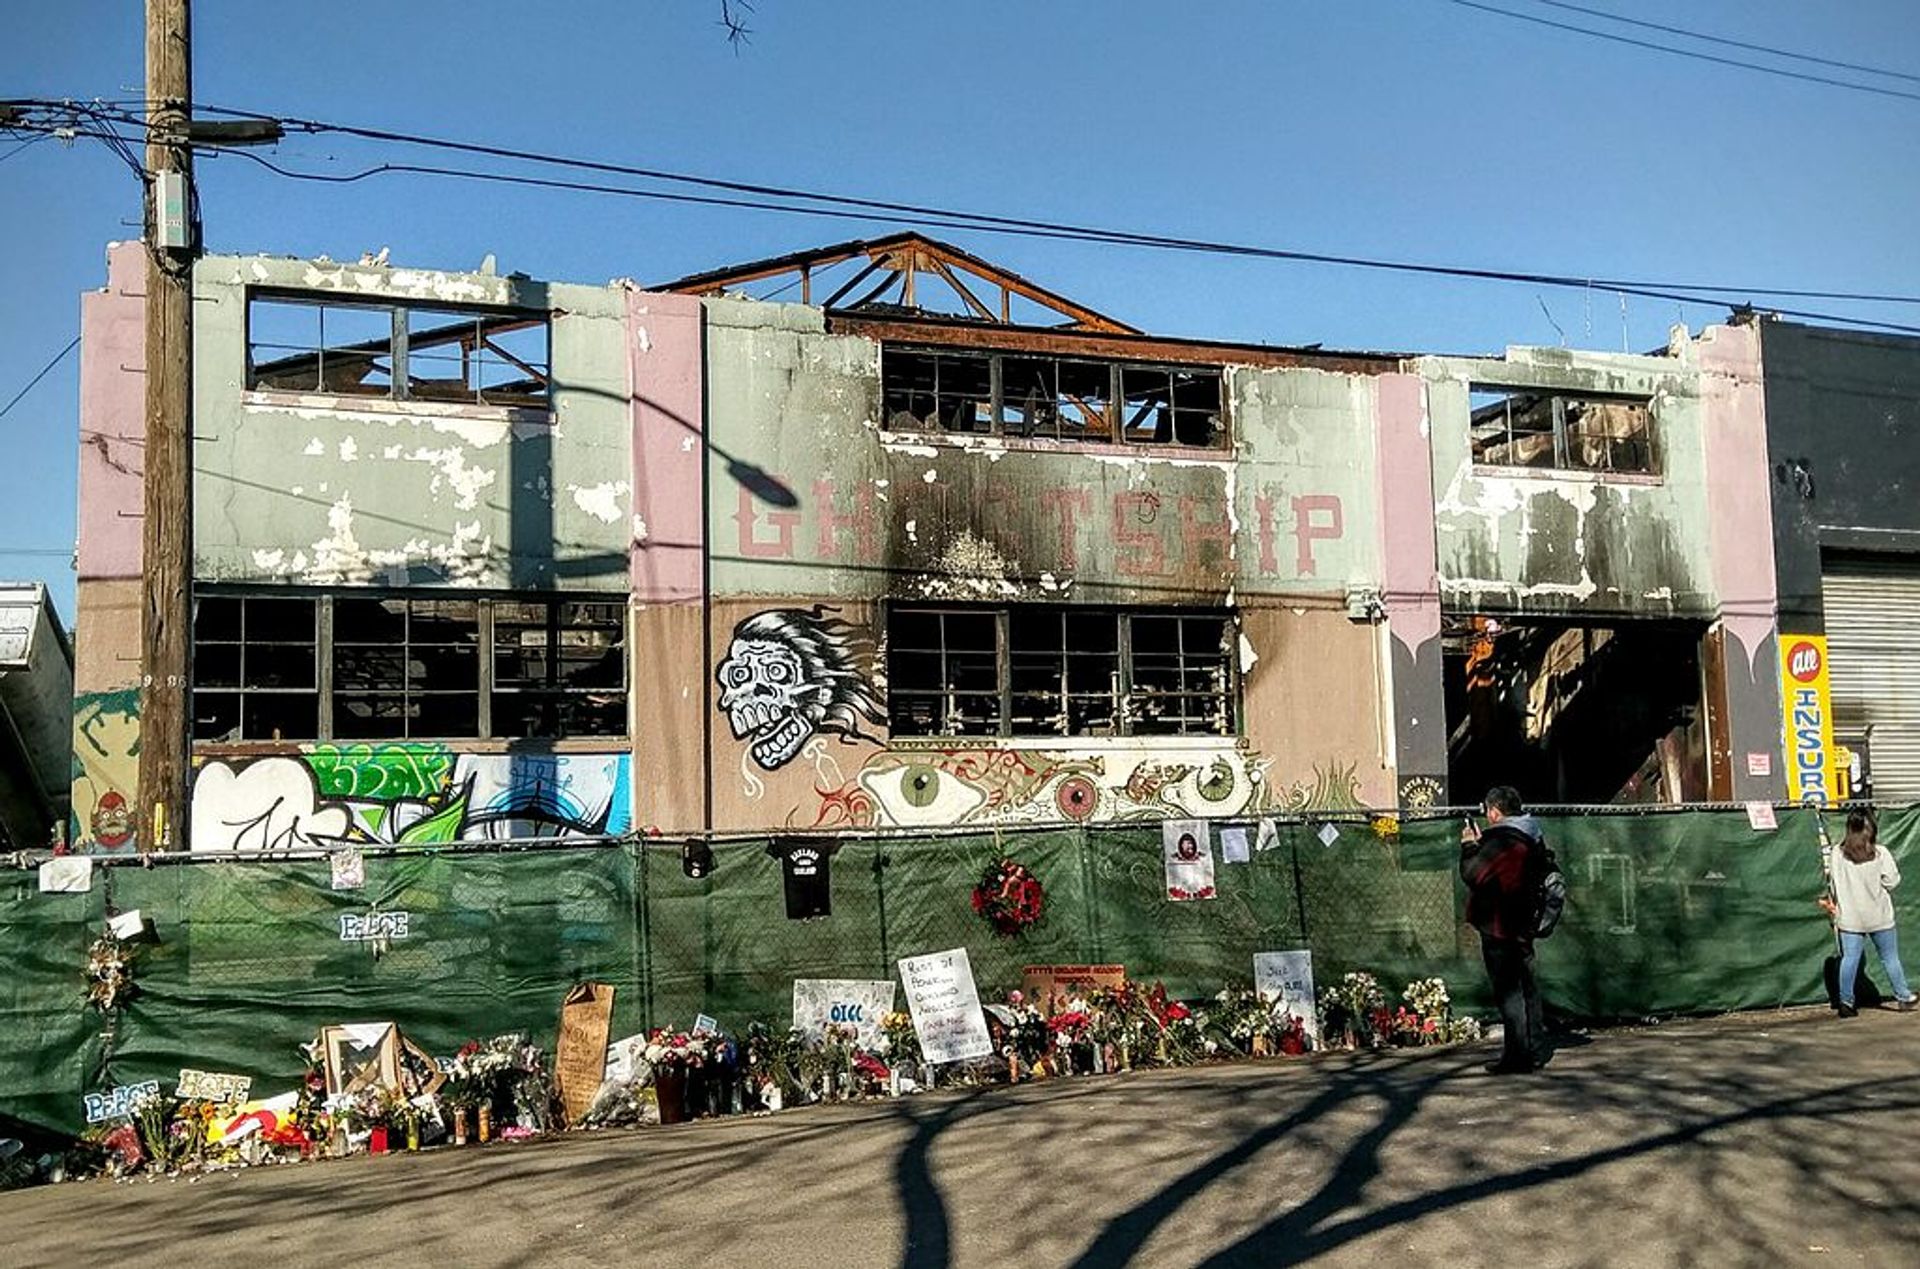 The Ghost Ship warehouse in Oakland, California, where 36 died in a fire in December 2016. Jim Heaphy, via Creative Commons